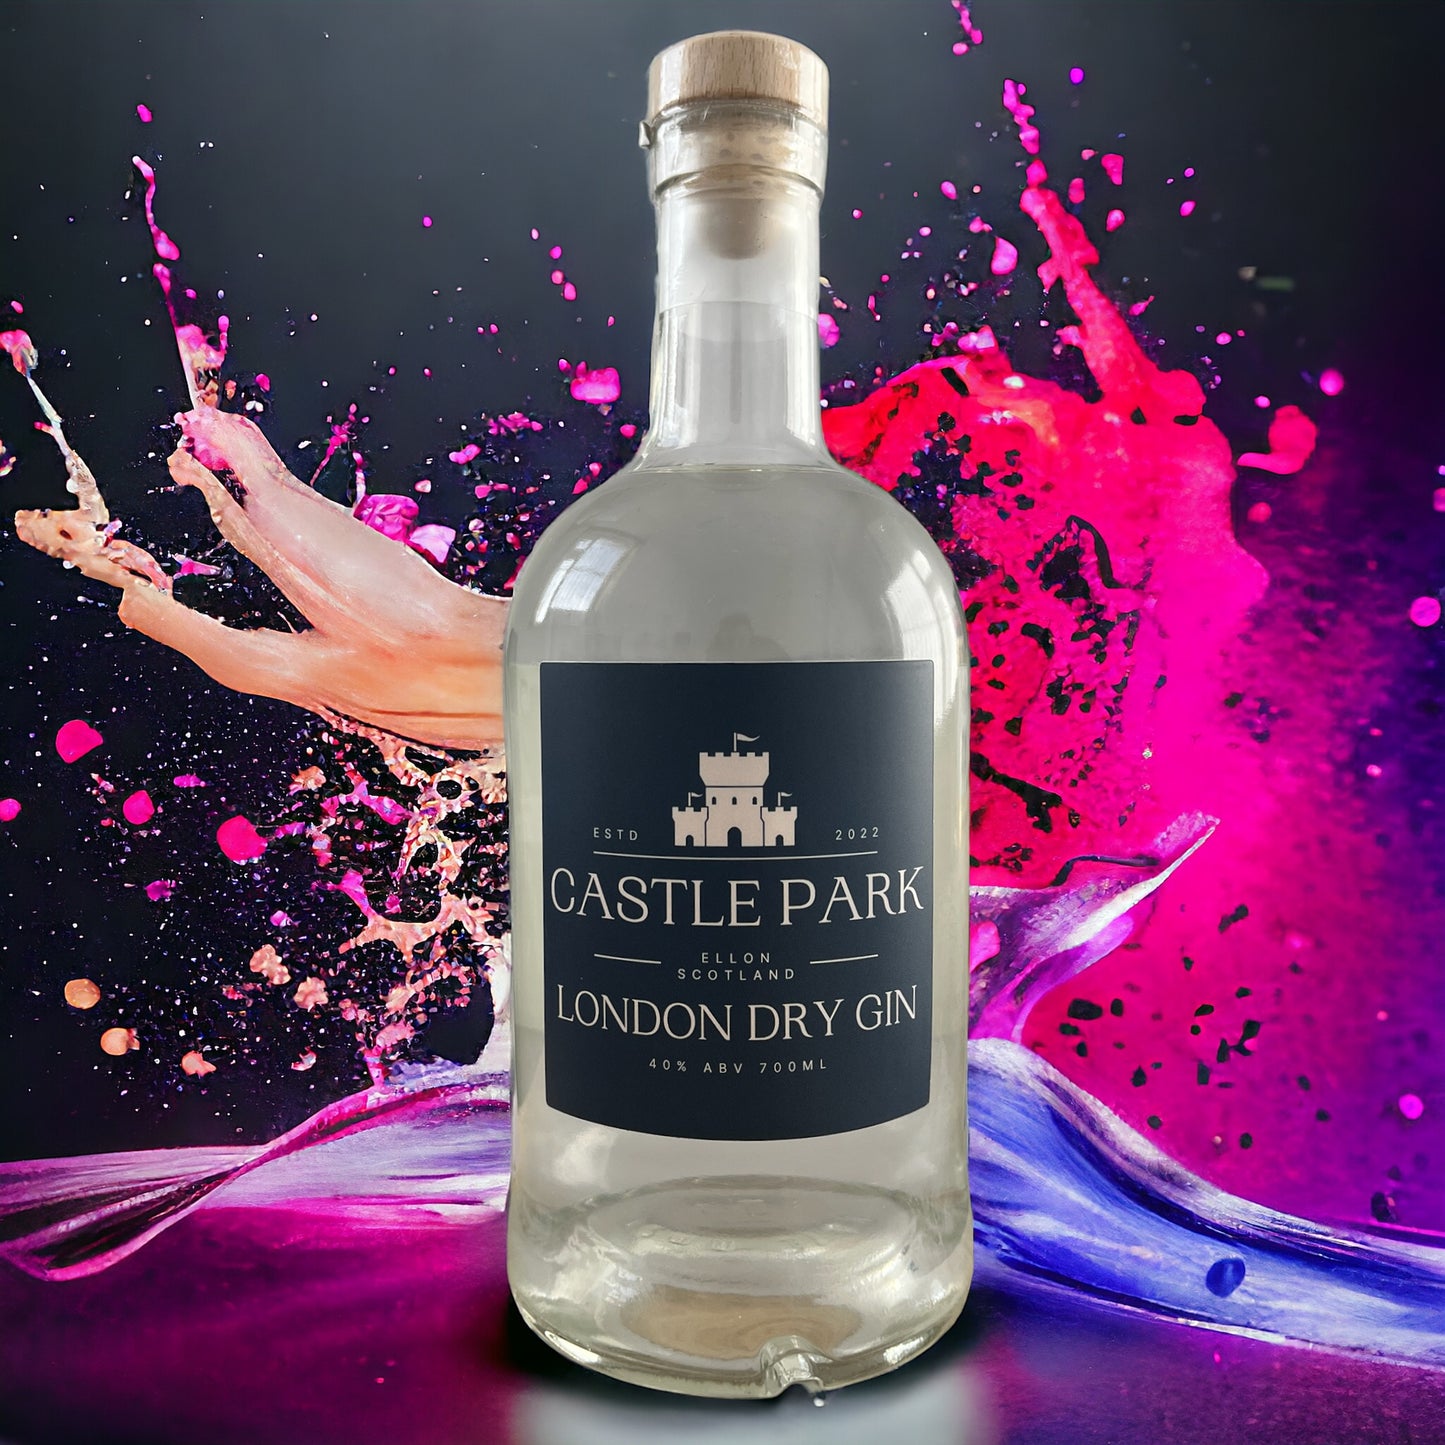 Castle Park London Dry Gin 40% 700ml with a colourful background